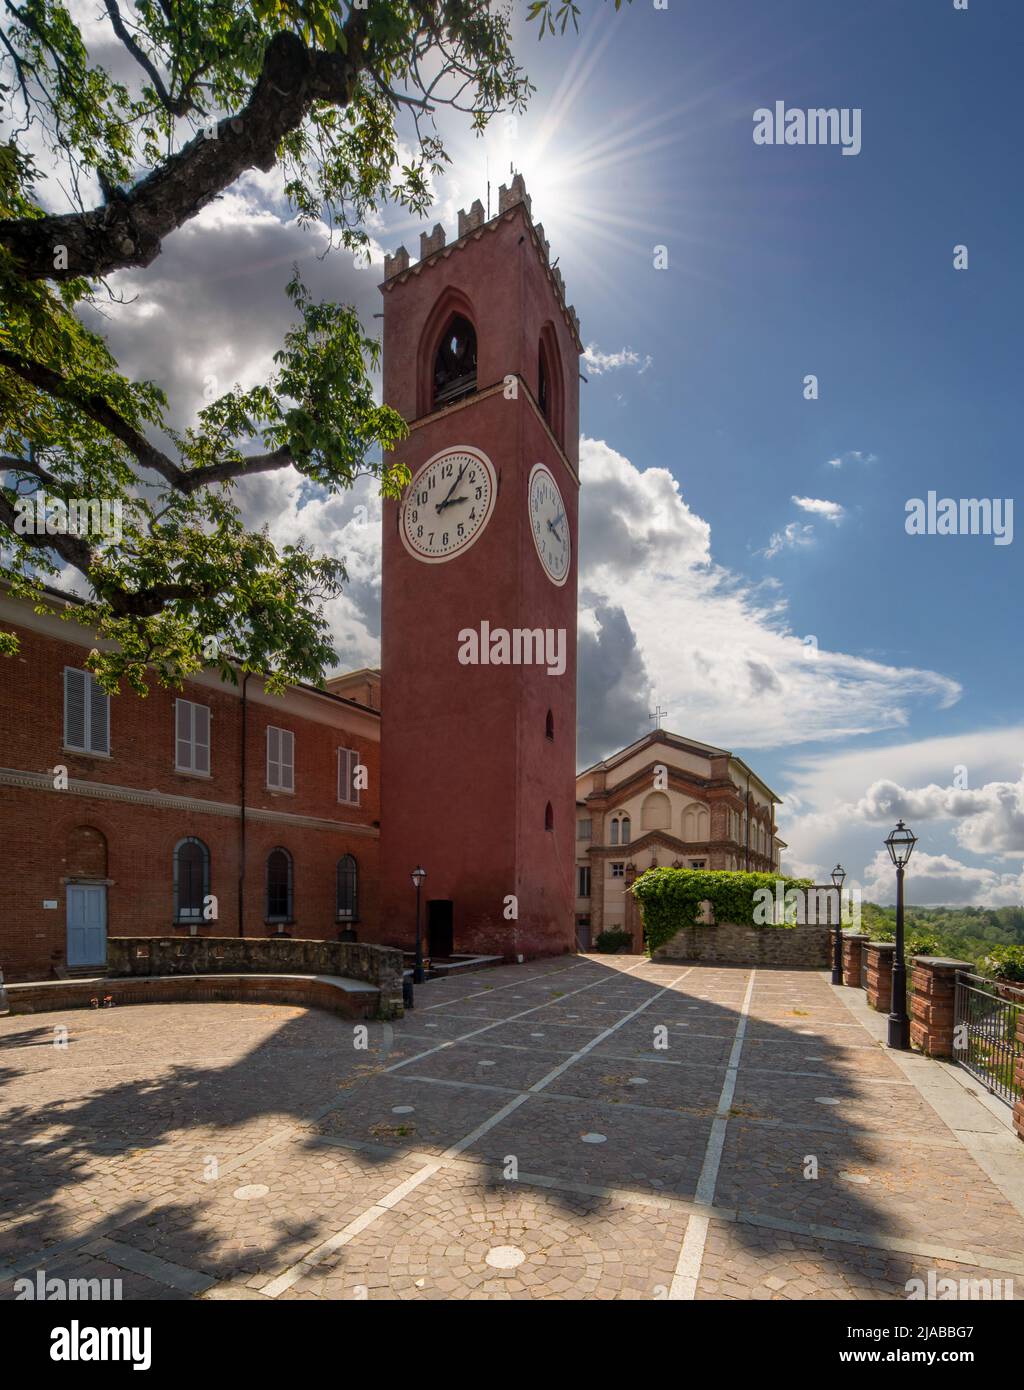 Dogliani, Langhe, Piedmont, Italy - May 17, 2022: the Civic Clock Tower in the ancient Borgo Castello (Castle Village) Stock Photo